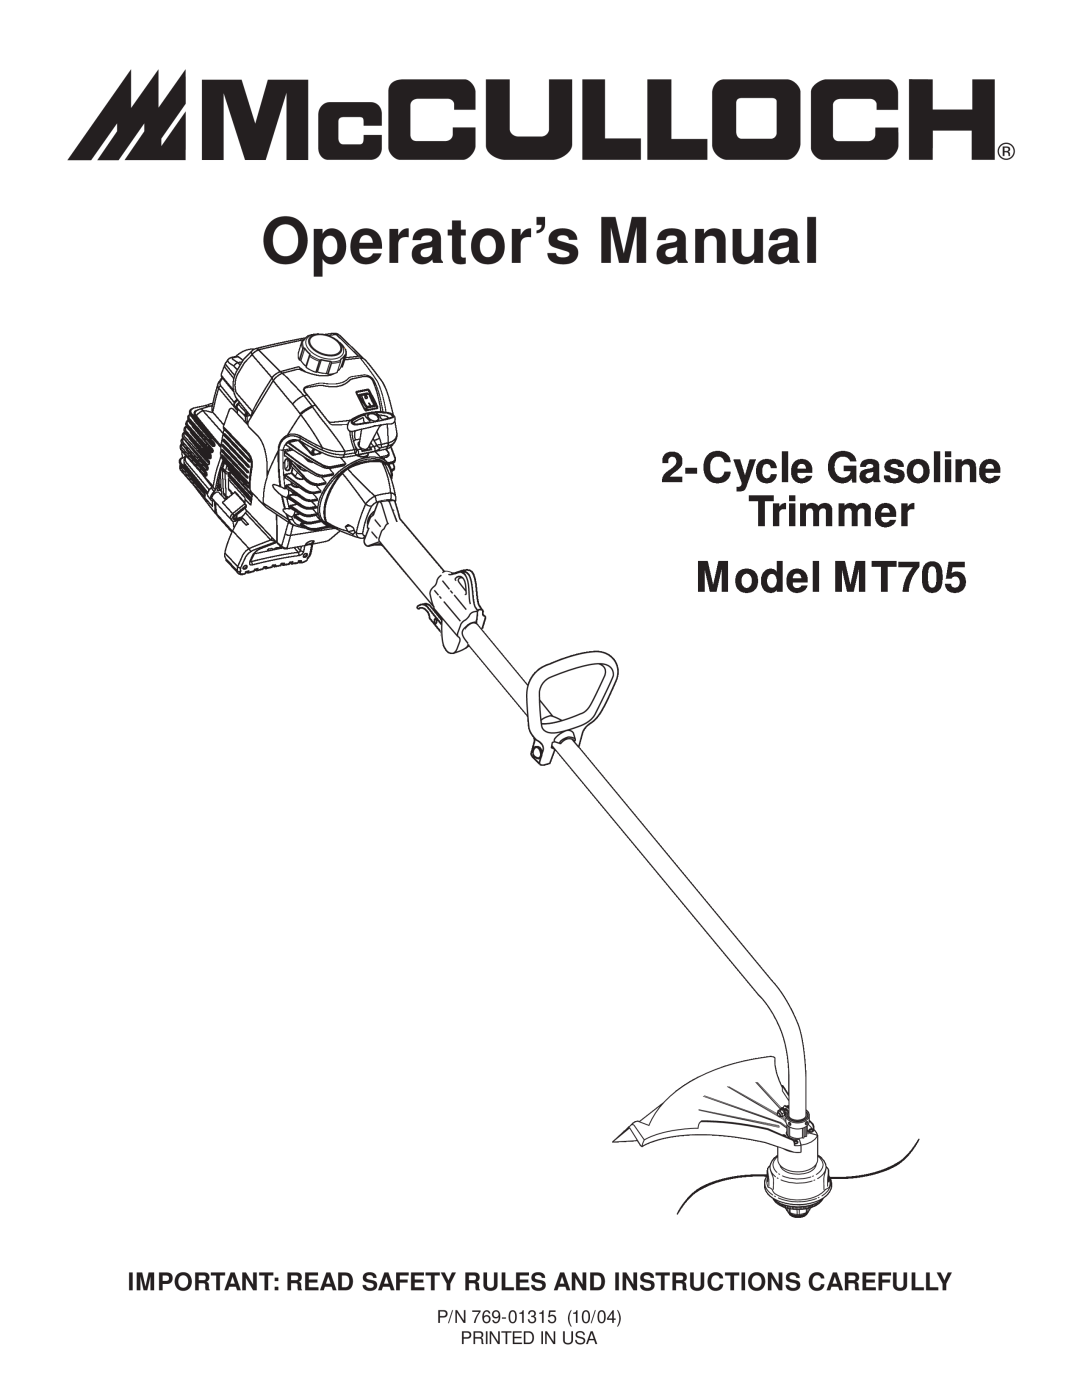 McCulloch manual Operator’s Manual, Cycle Gasoline Trimmer Model MT705 